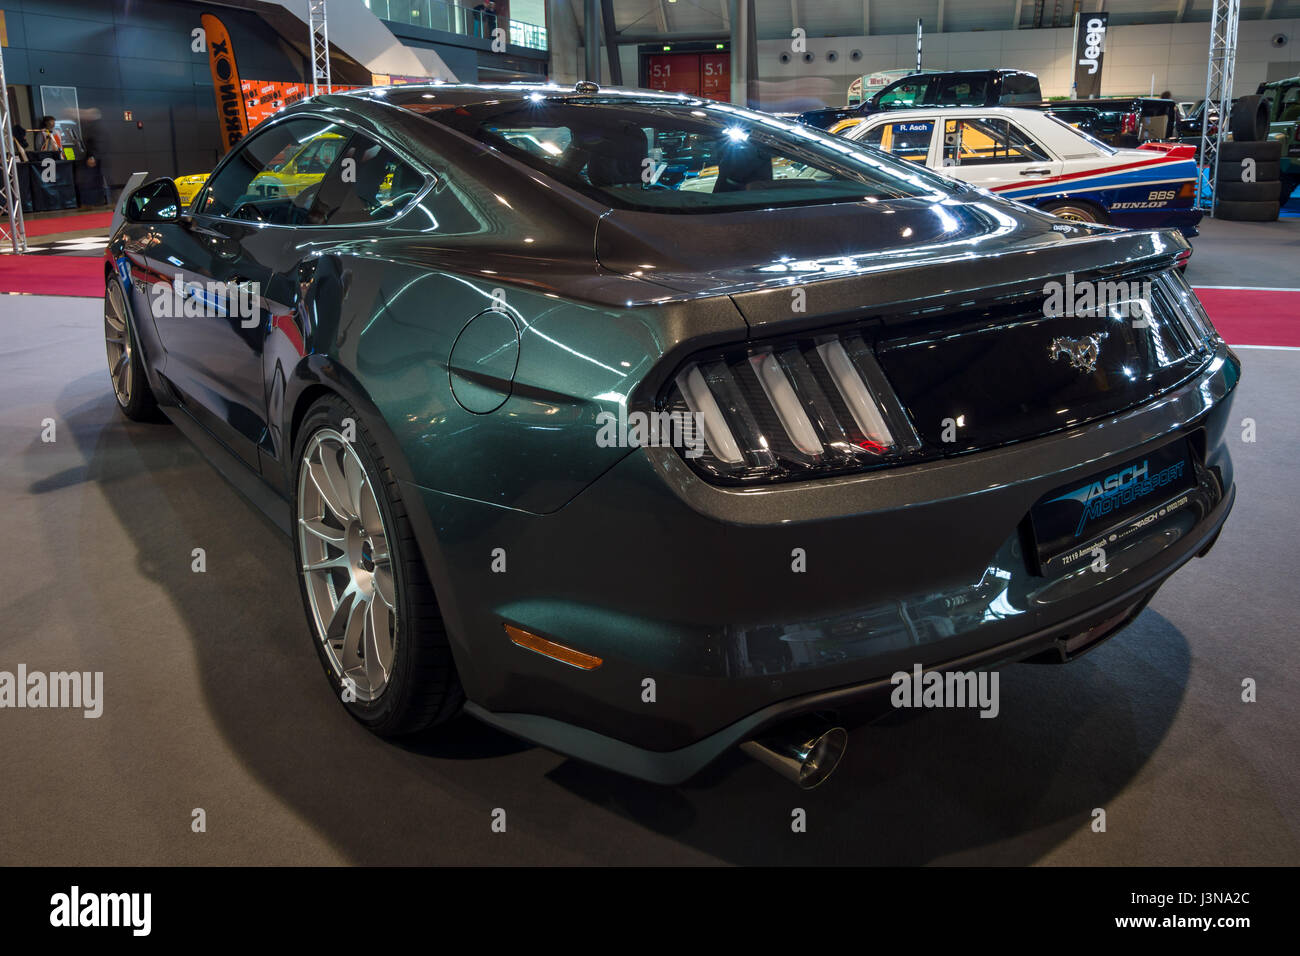 Stuttgart Germany March 03 17 Pony Car Ford Mustang Gt V8 Fastback Coupe 16 Rear View Europe S Greatest Classic Car Exhibition Retro Classics Stock Photo Alamy